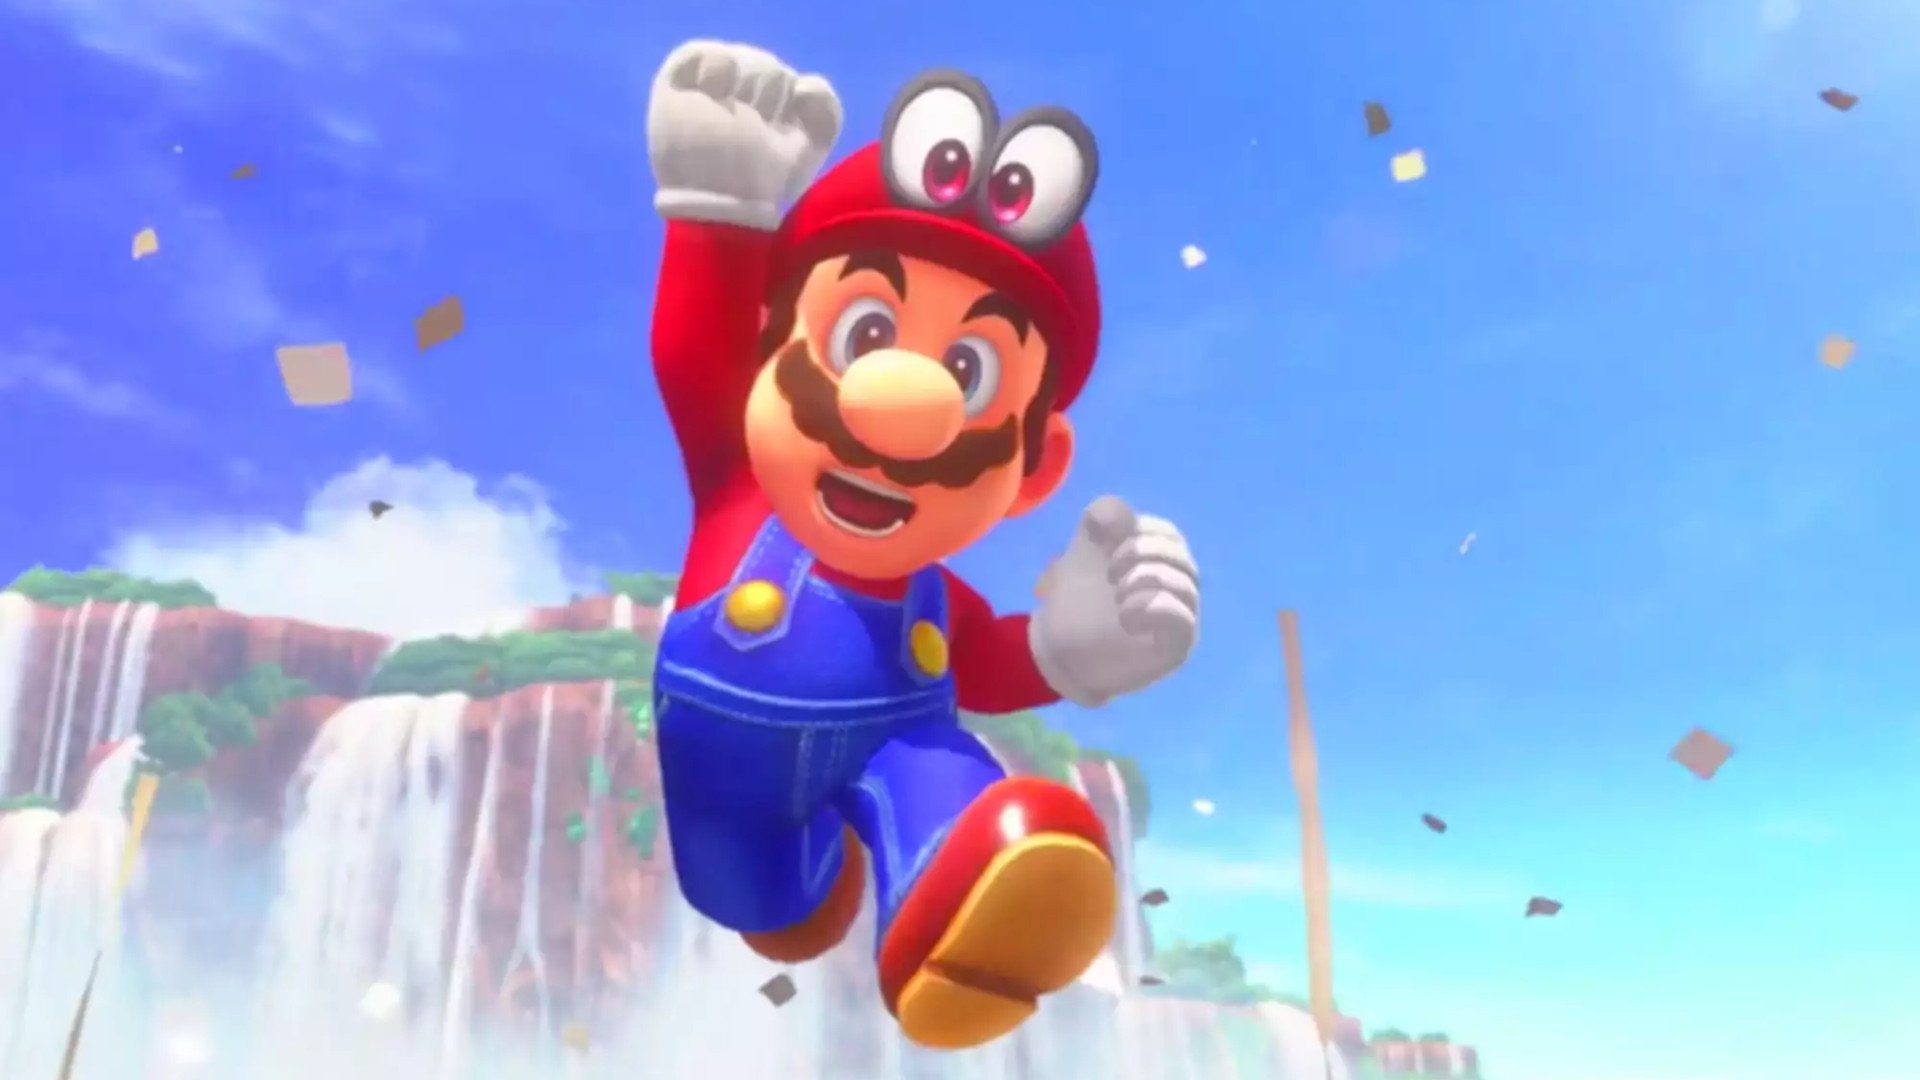 New Super Mario Bros movie is “a lot of fun”, says Charles Martinet. The Digital Fix